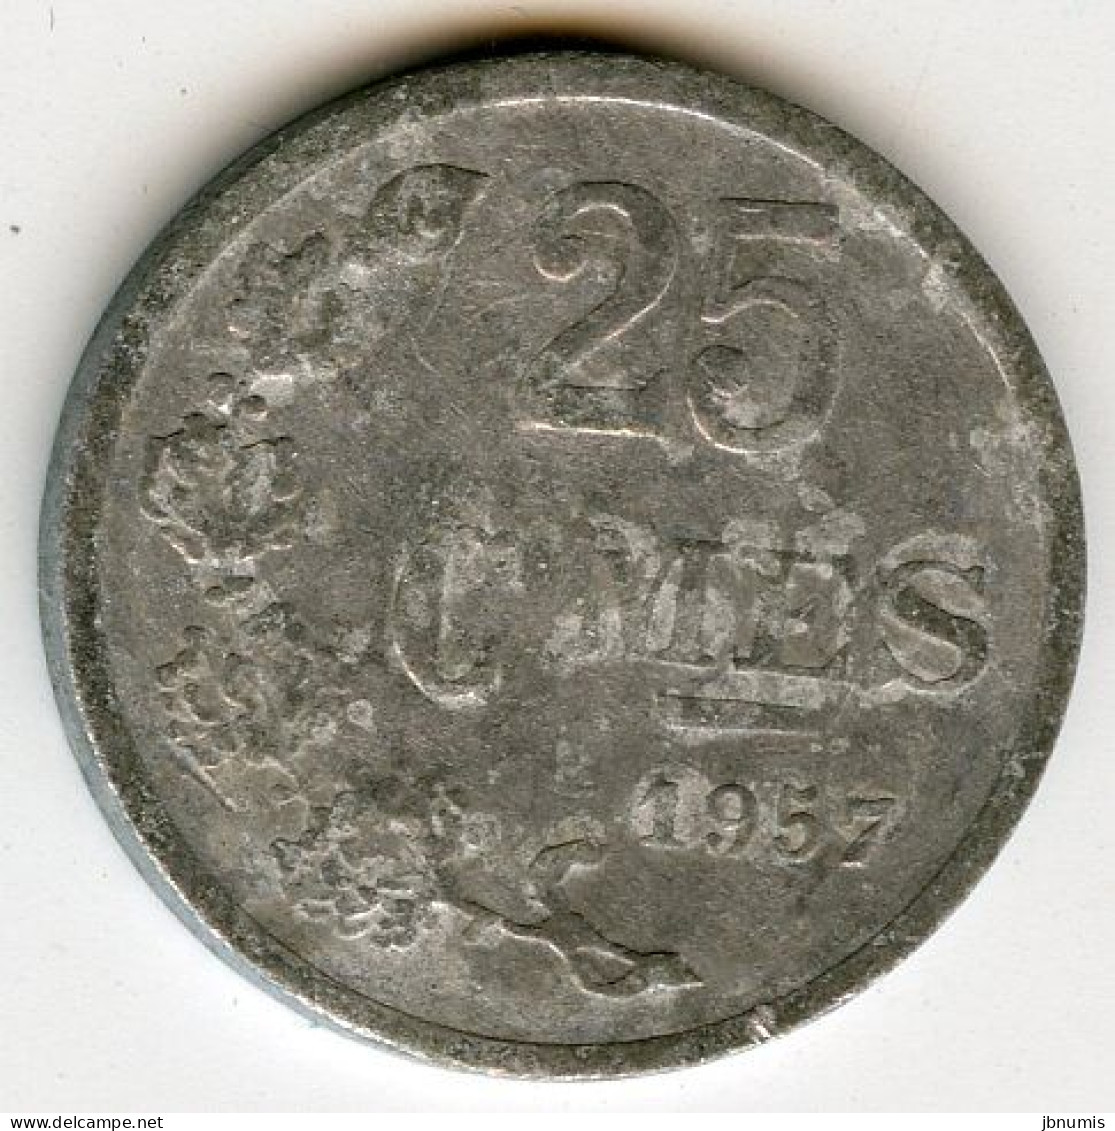 Luxembourg 25 Centimes 1957 KM 45a.1 - Luxemburg